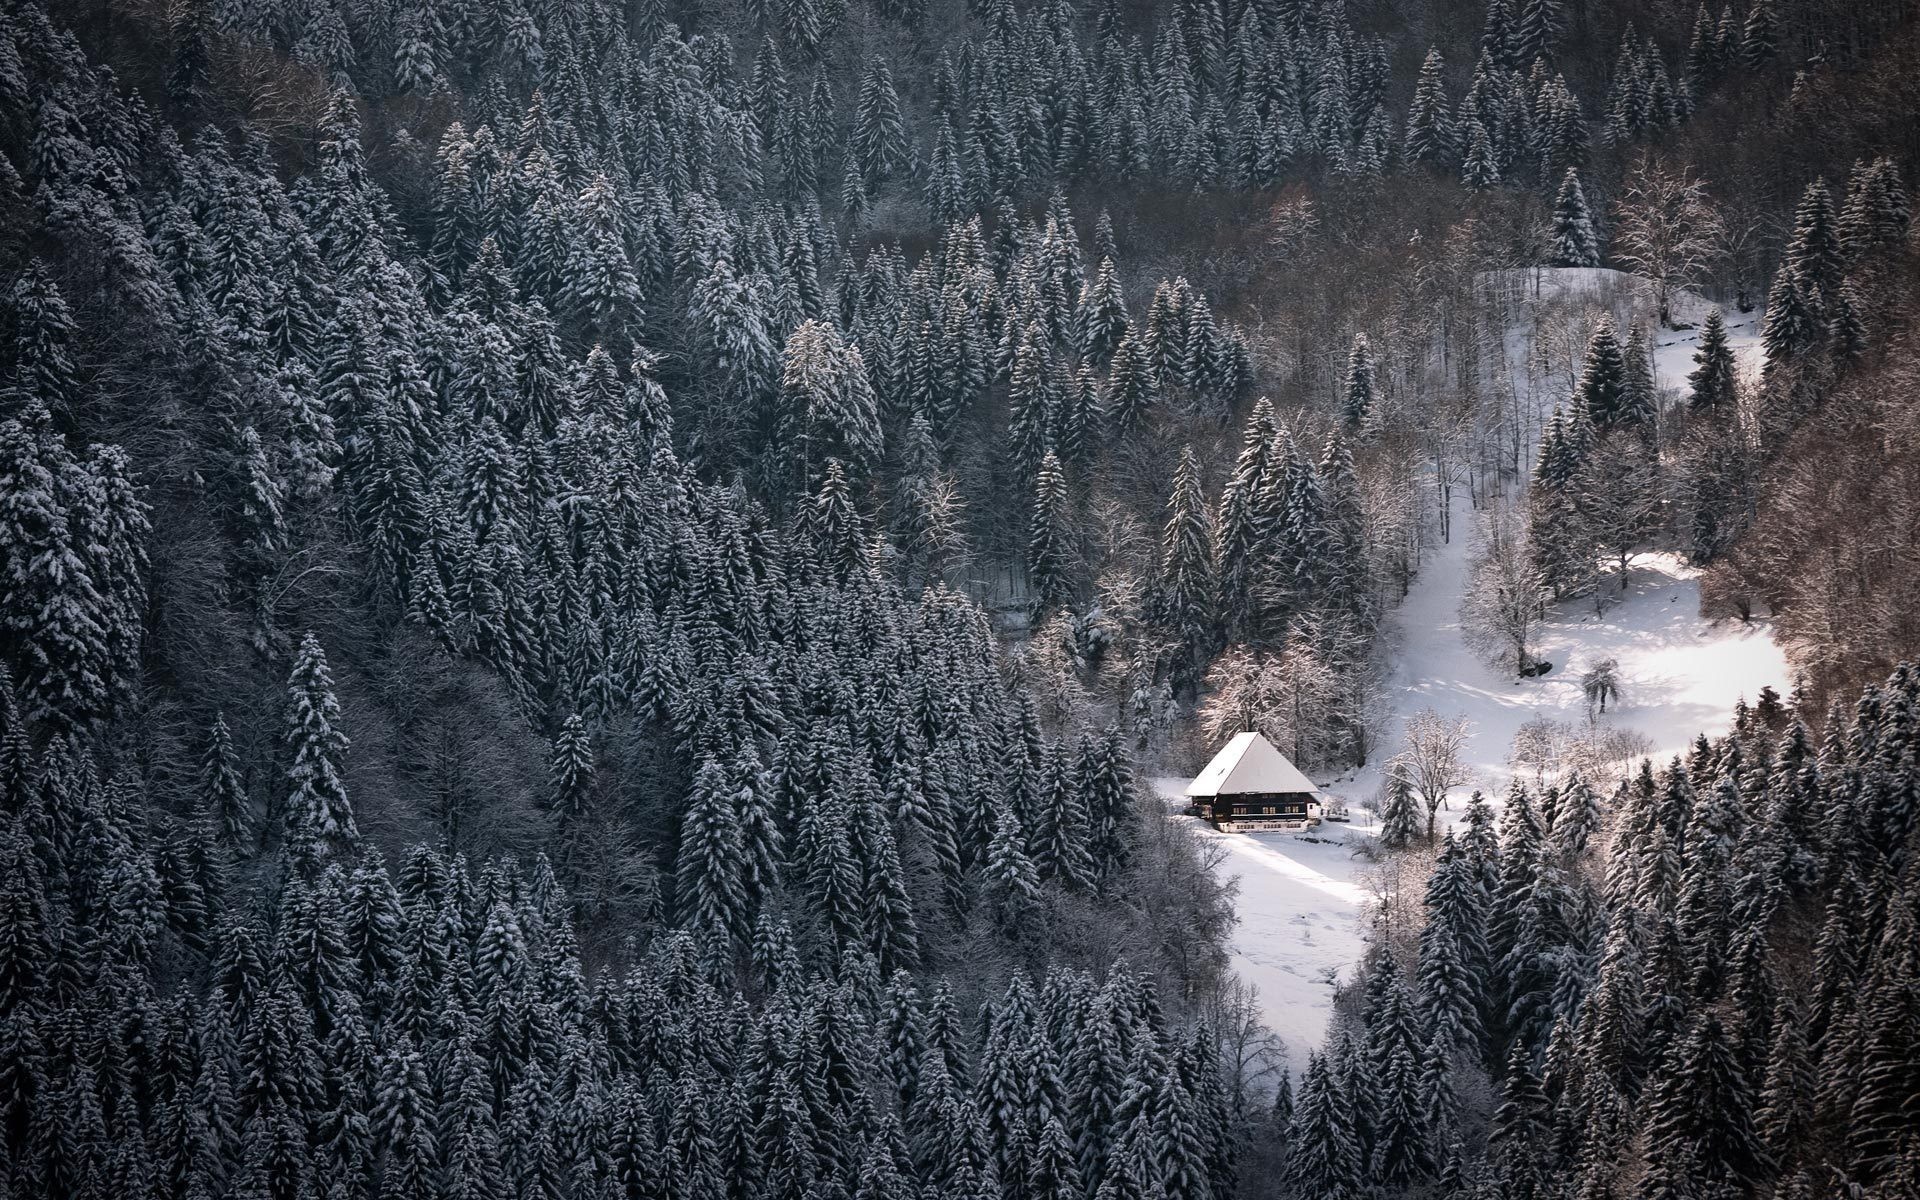 Snowy House In Mountains 4K Wallpapers